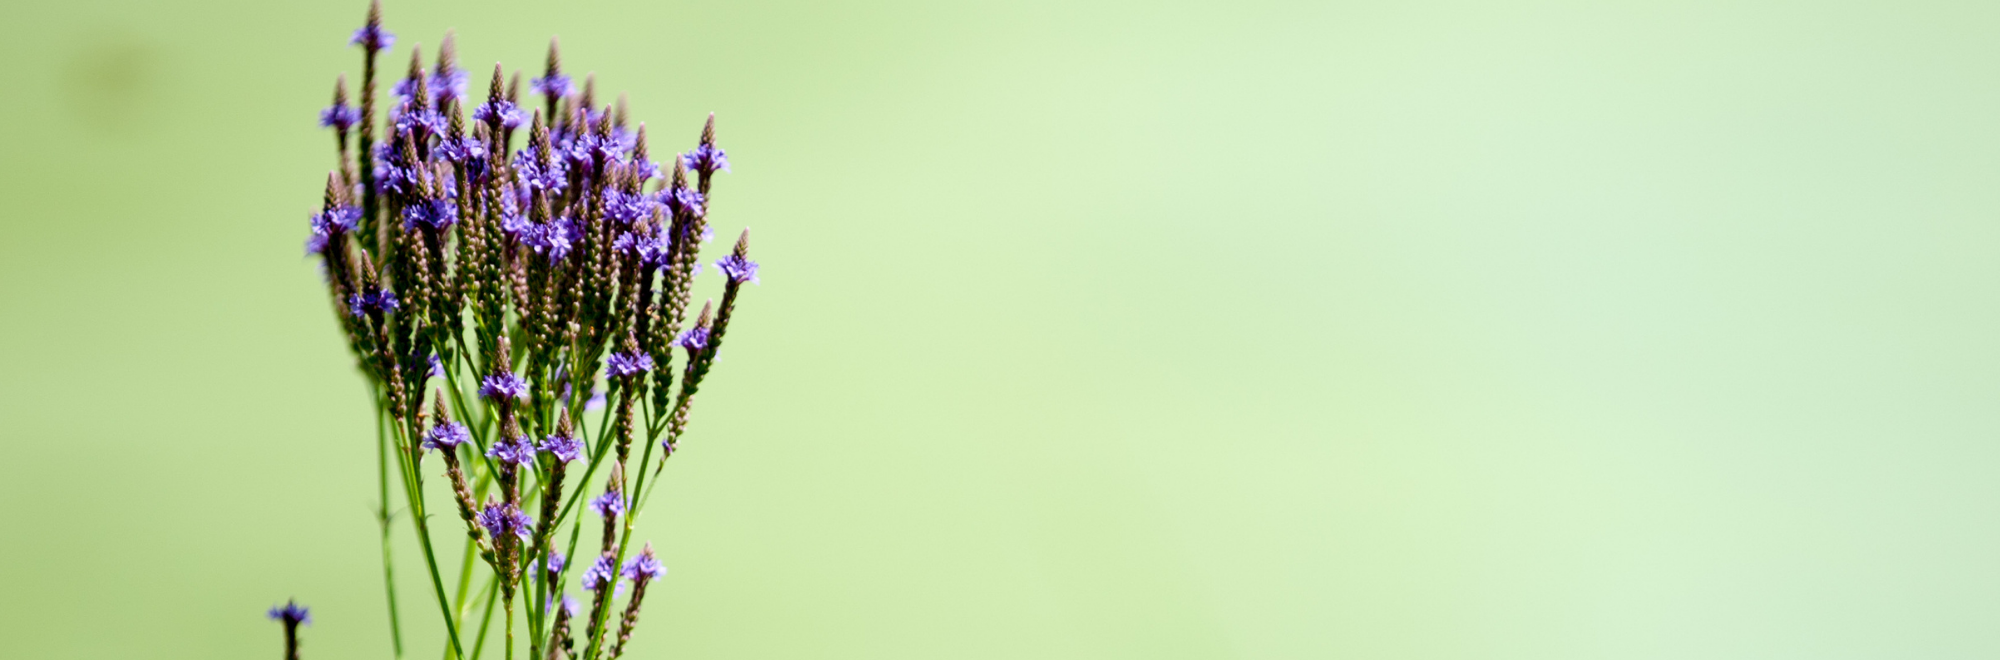 purple flower with green background of the grass